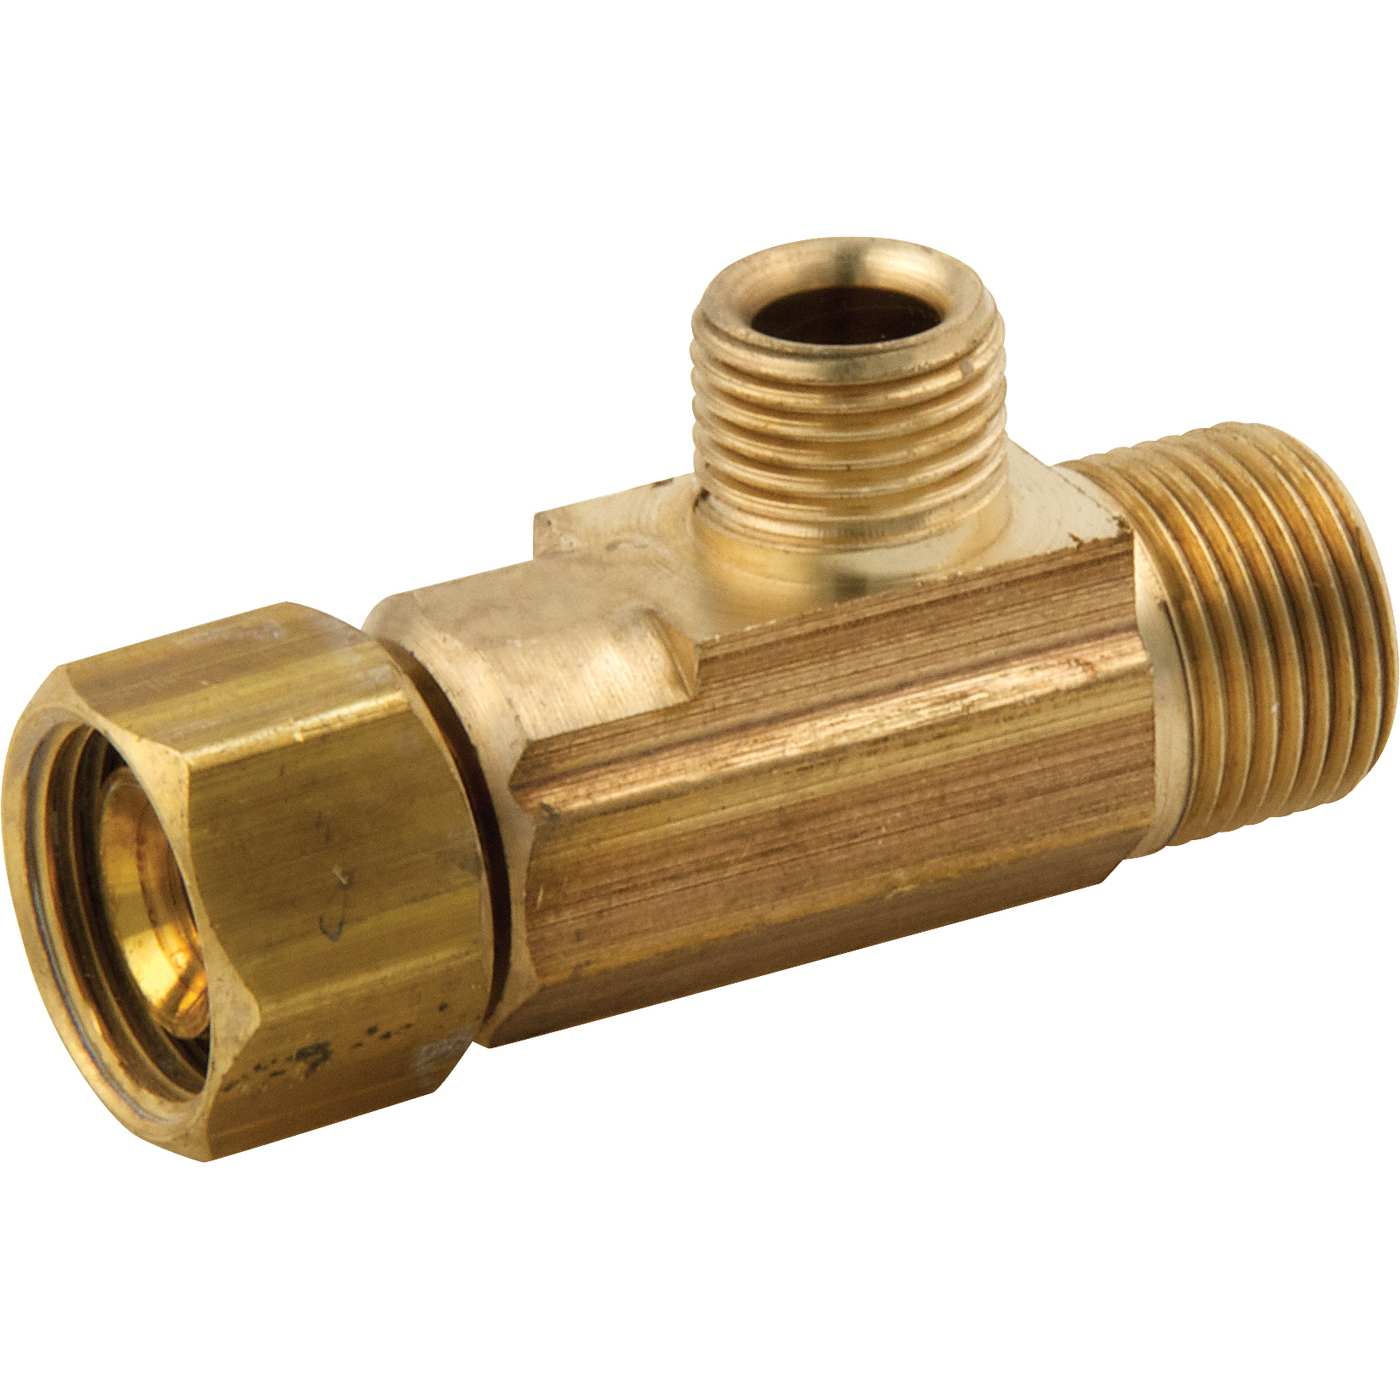 Compression fitting - Female tee adapter - Master Plumber®